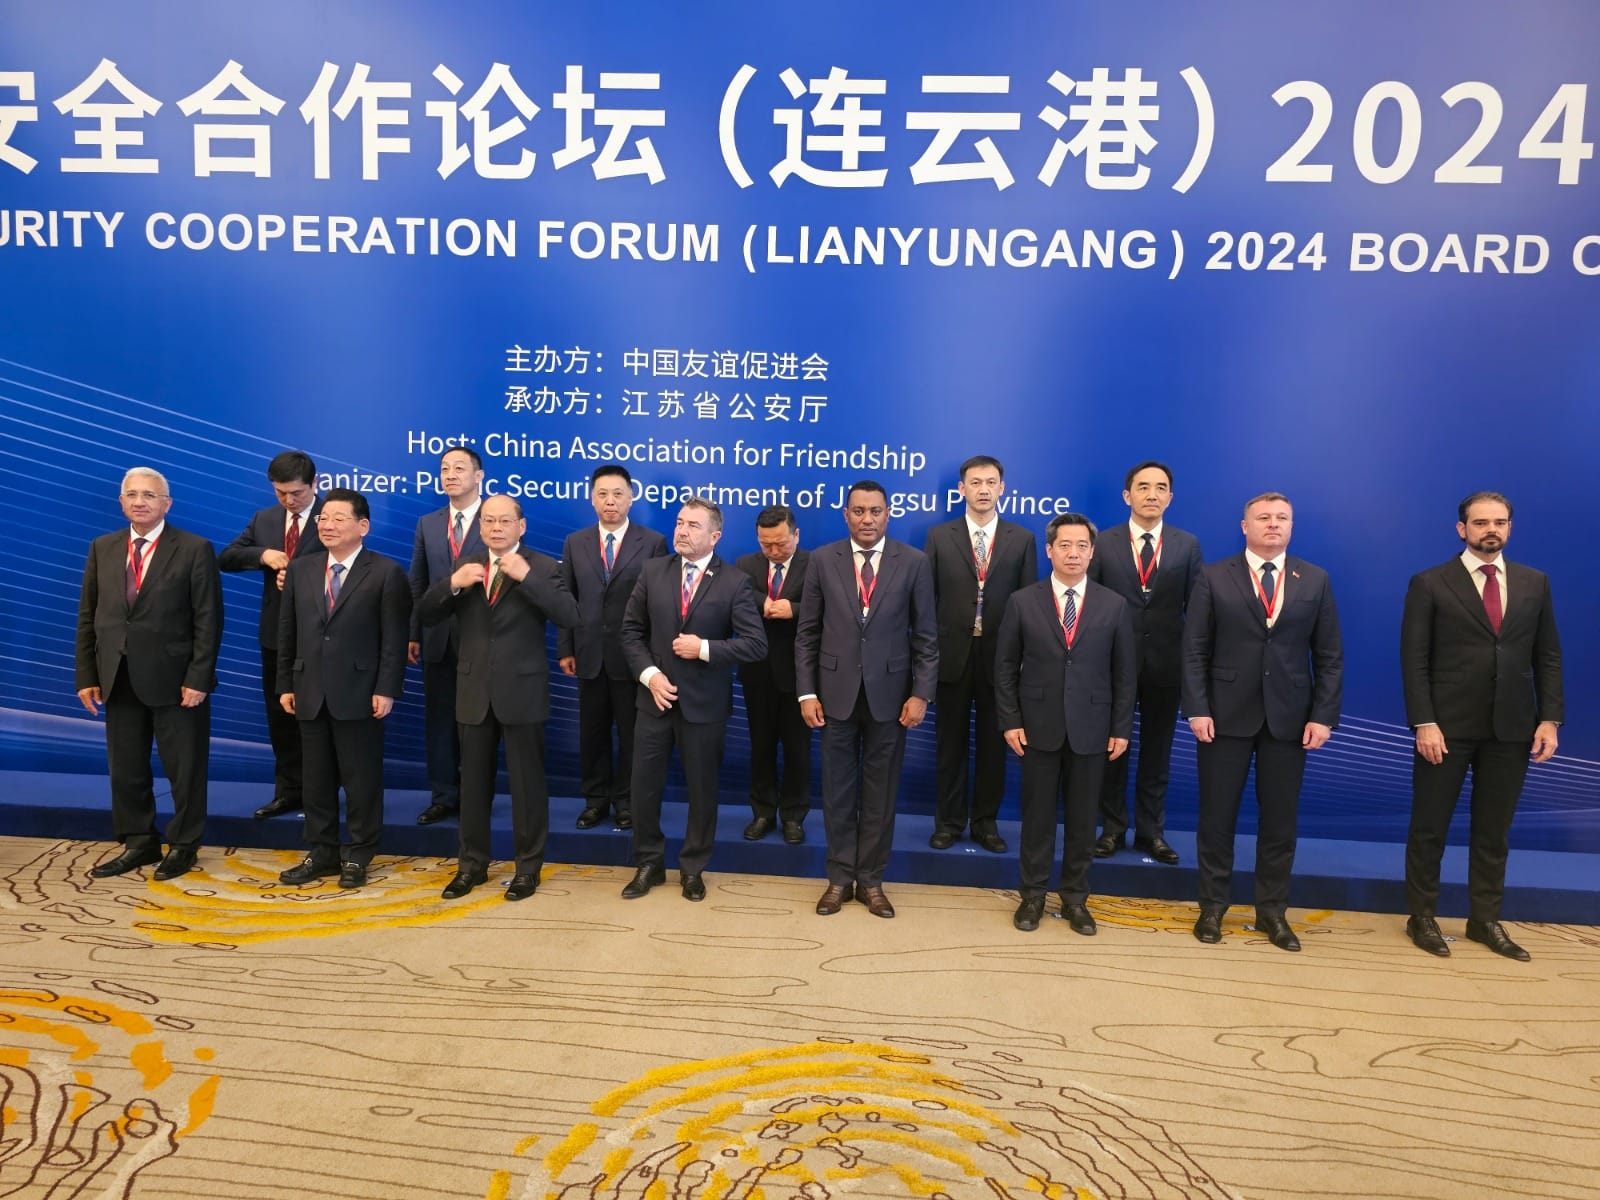 Ethiopia Takes Part in the Global Public Security Cooperation Forum in Nantong, China